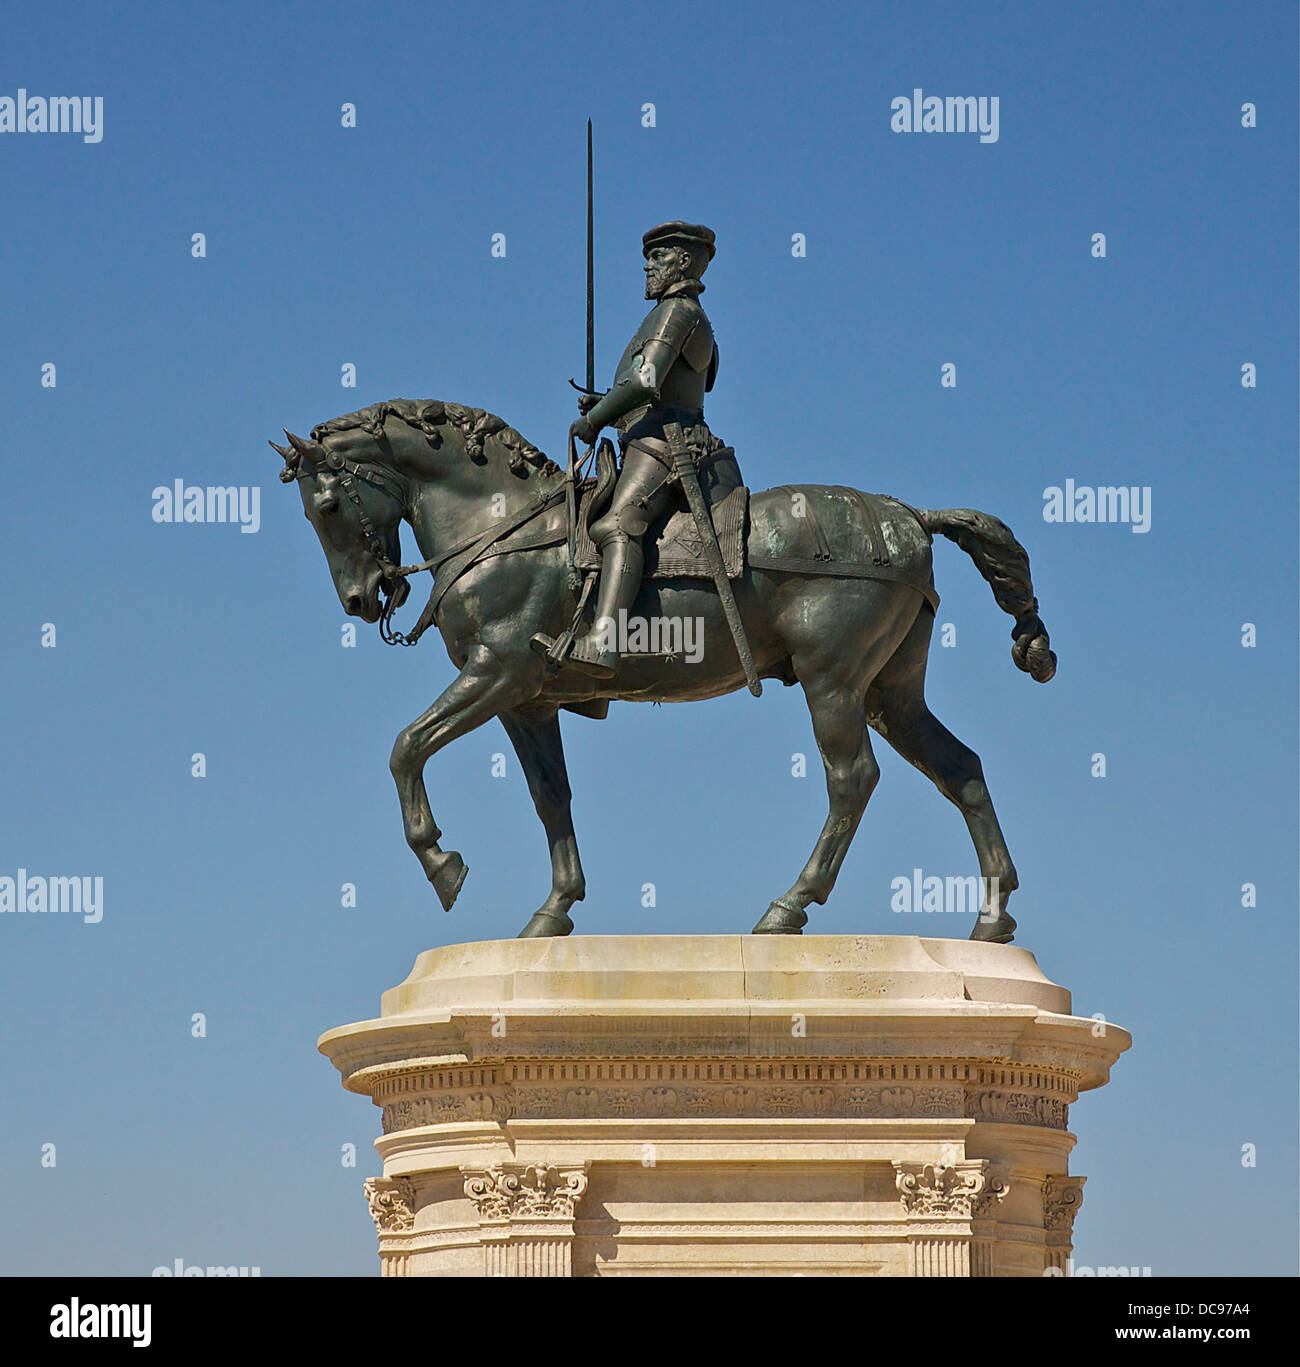 Equestrian bronze statue of Anne de Montmorency, Constable of France, (1492-1567) in the courtyard of the Château de Chantilly. Stock Photo